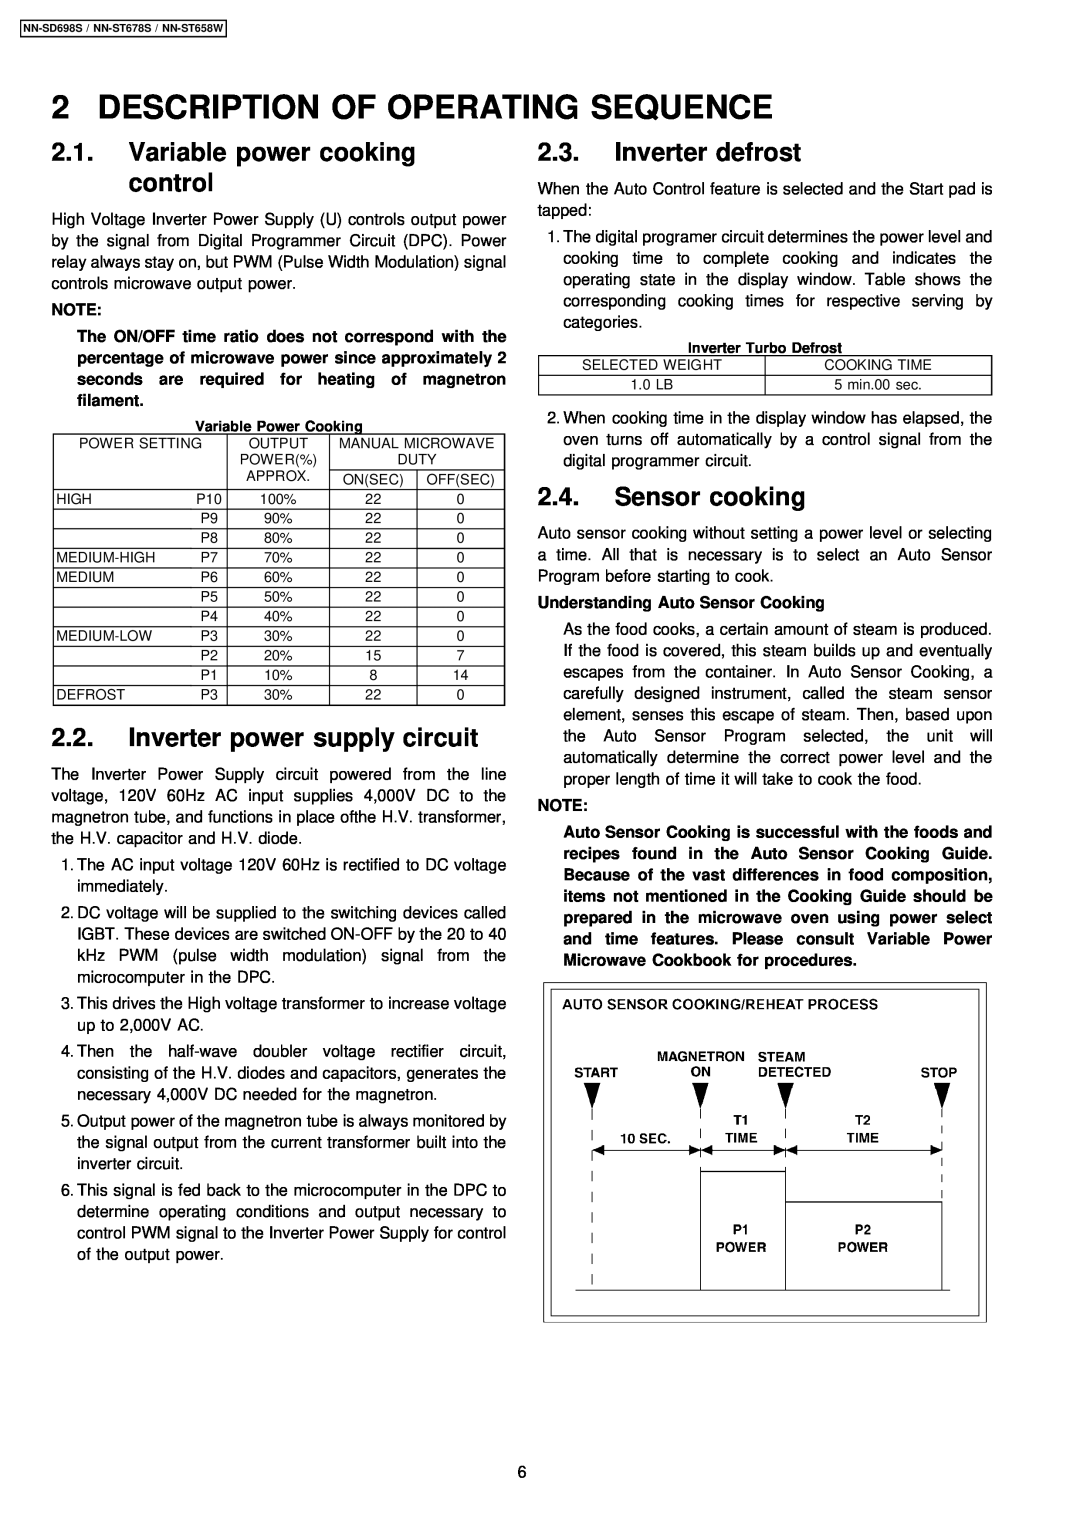 Panasonic NN-SD698S manual Description Of Operating Sequence, Variable power cooking control, Inverter power supply circuit 